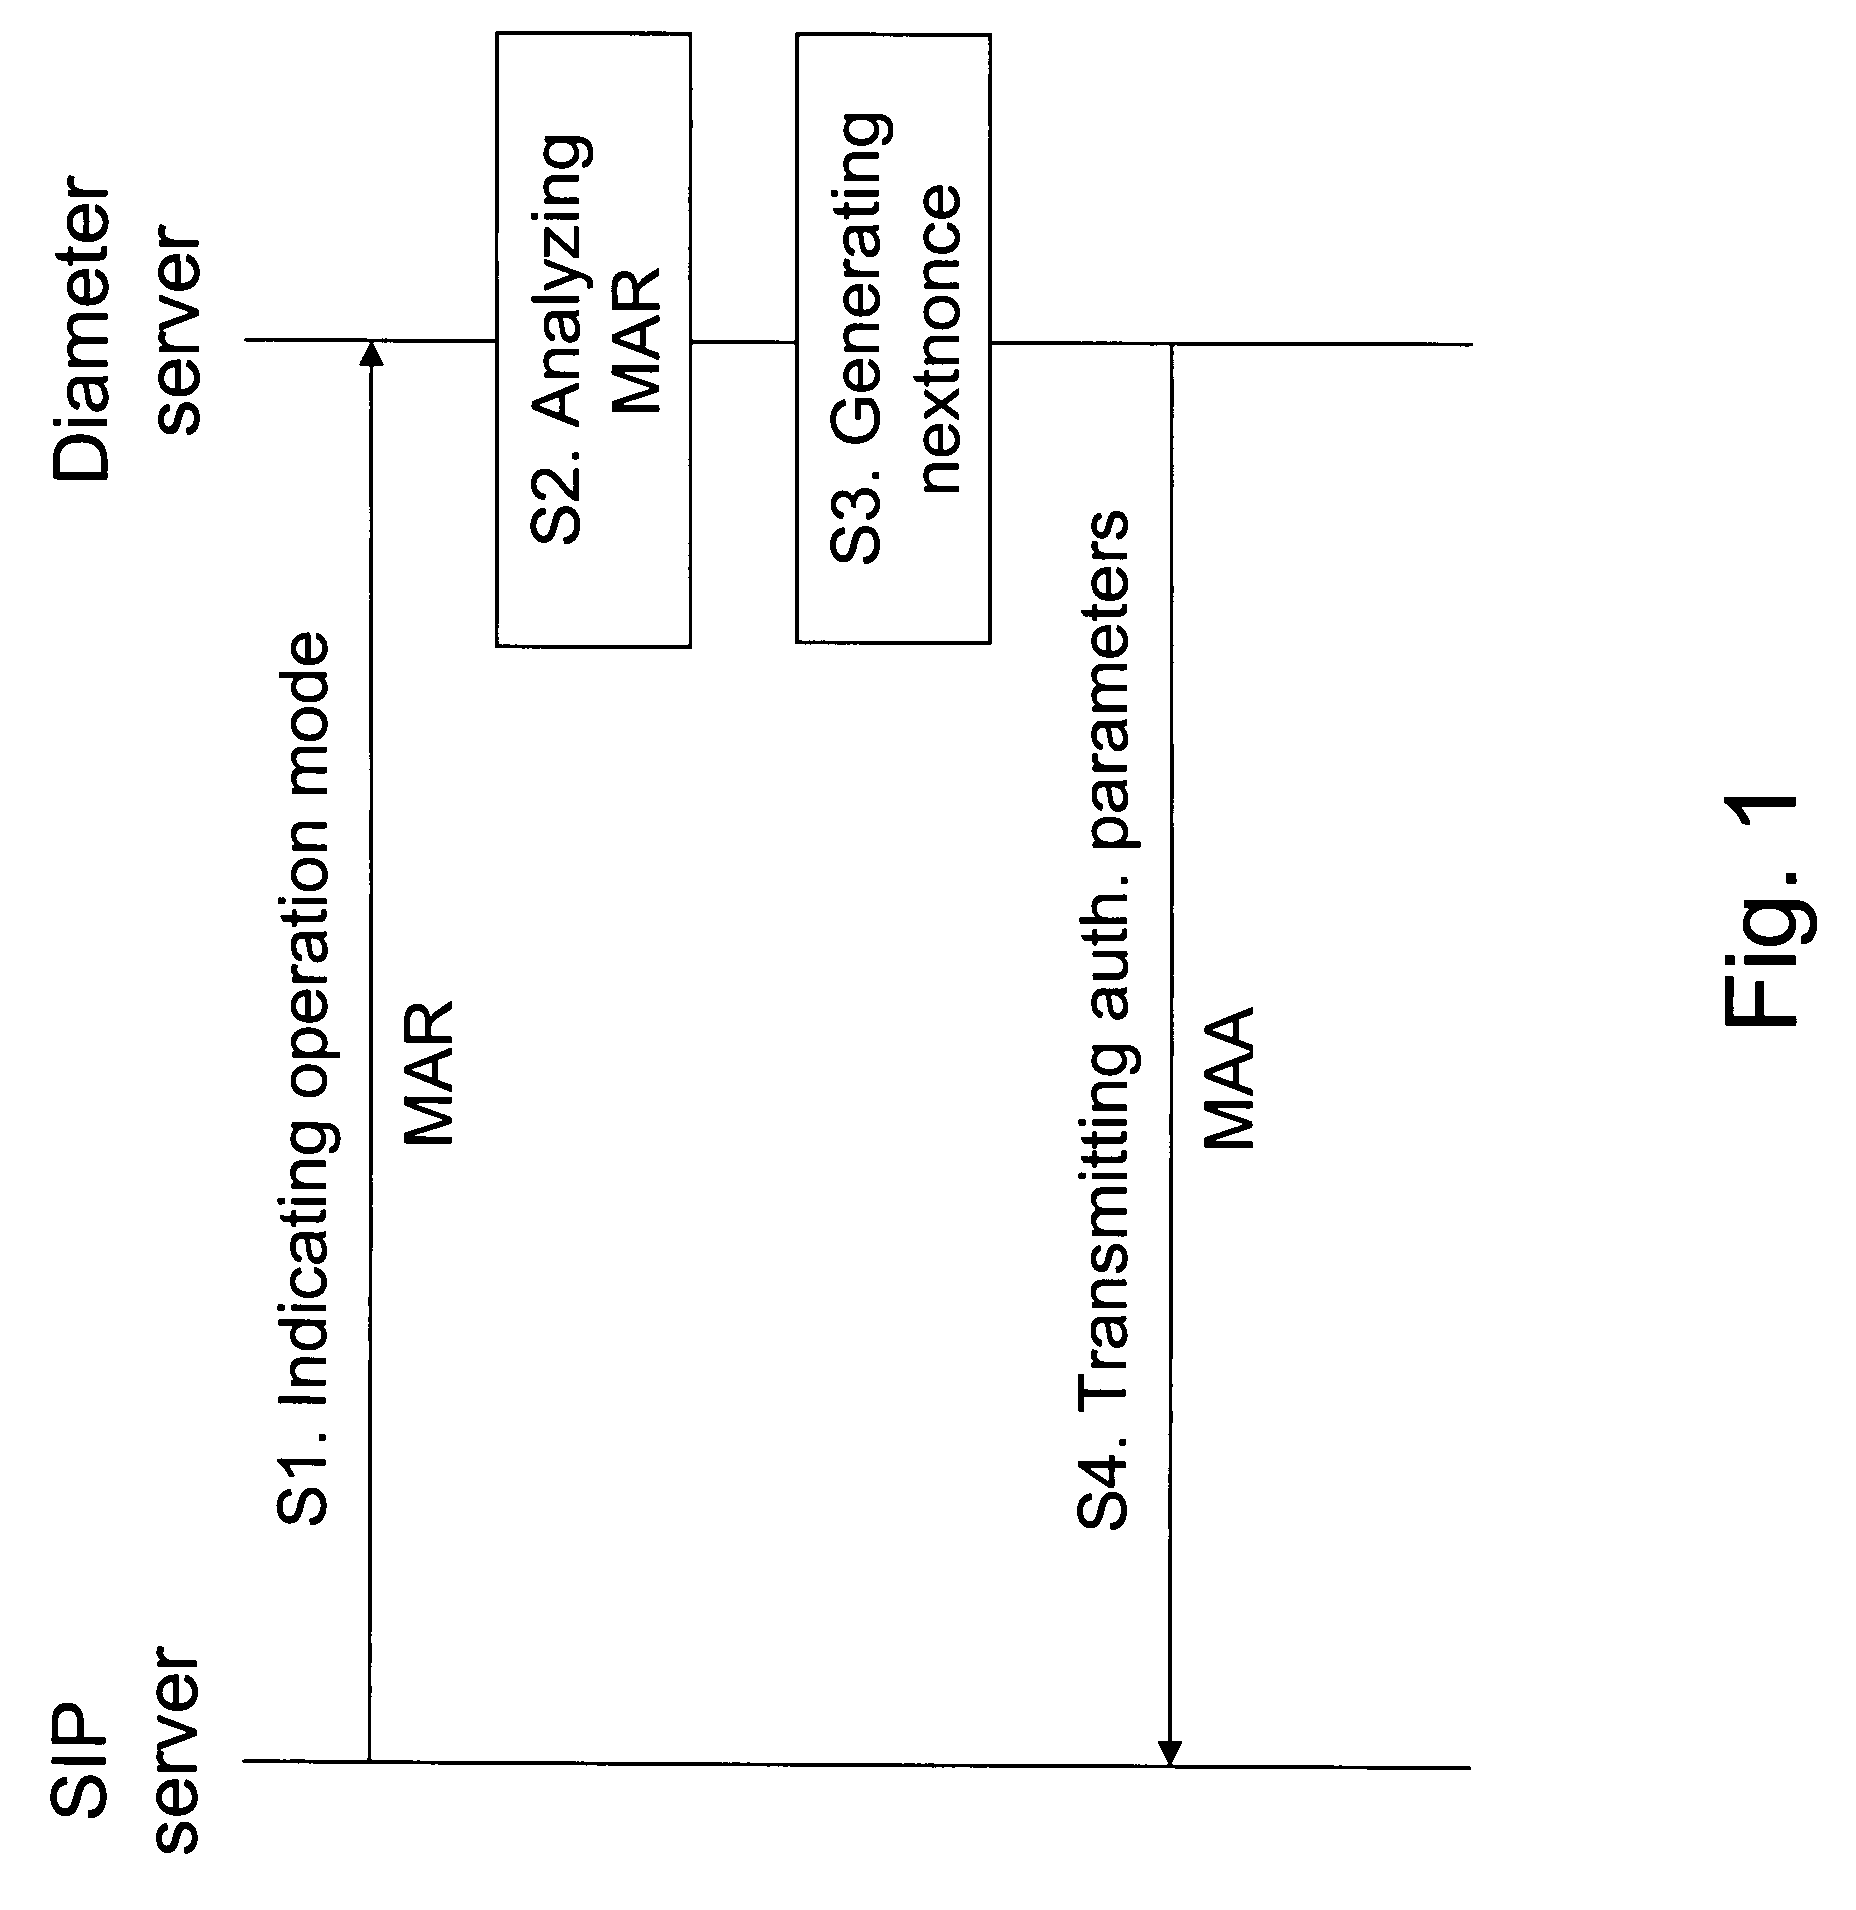 Usage of nonce-based authentication scheme in a session-based authentication application